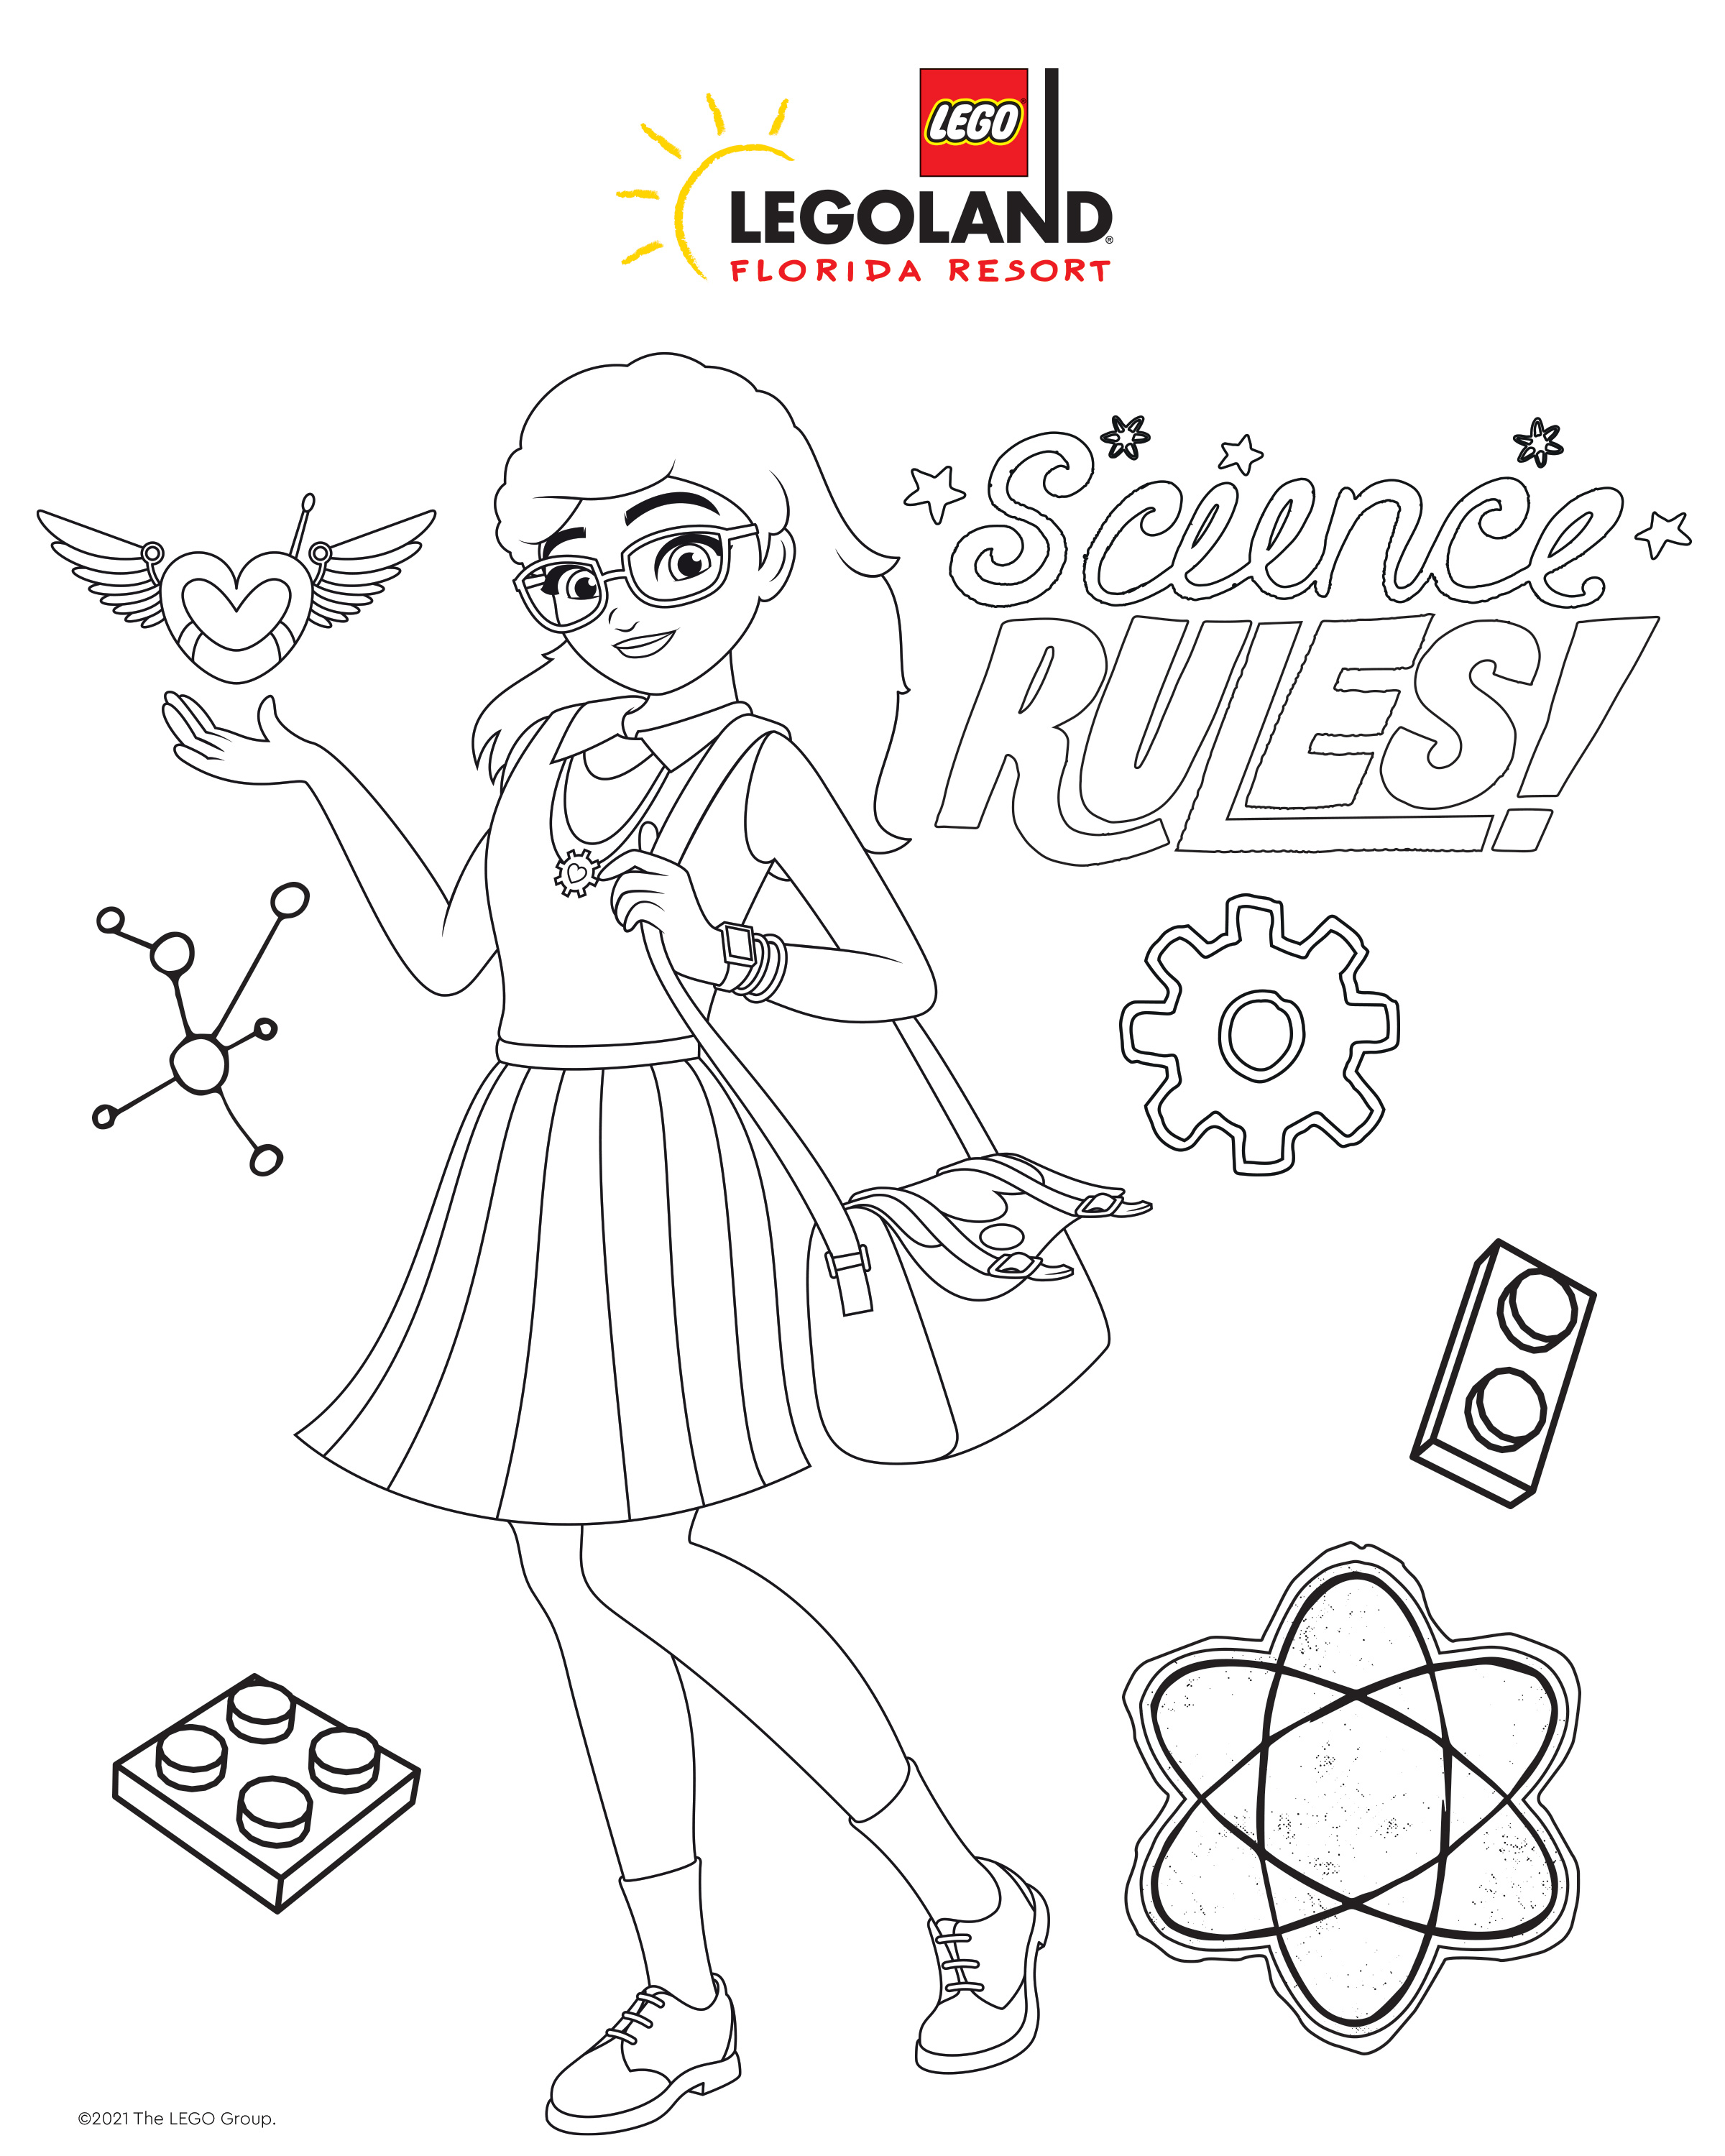 LEGO® Friends Weekends Coloring Sheets